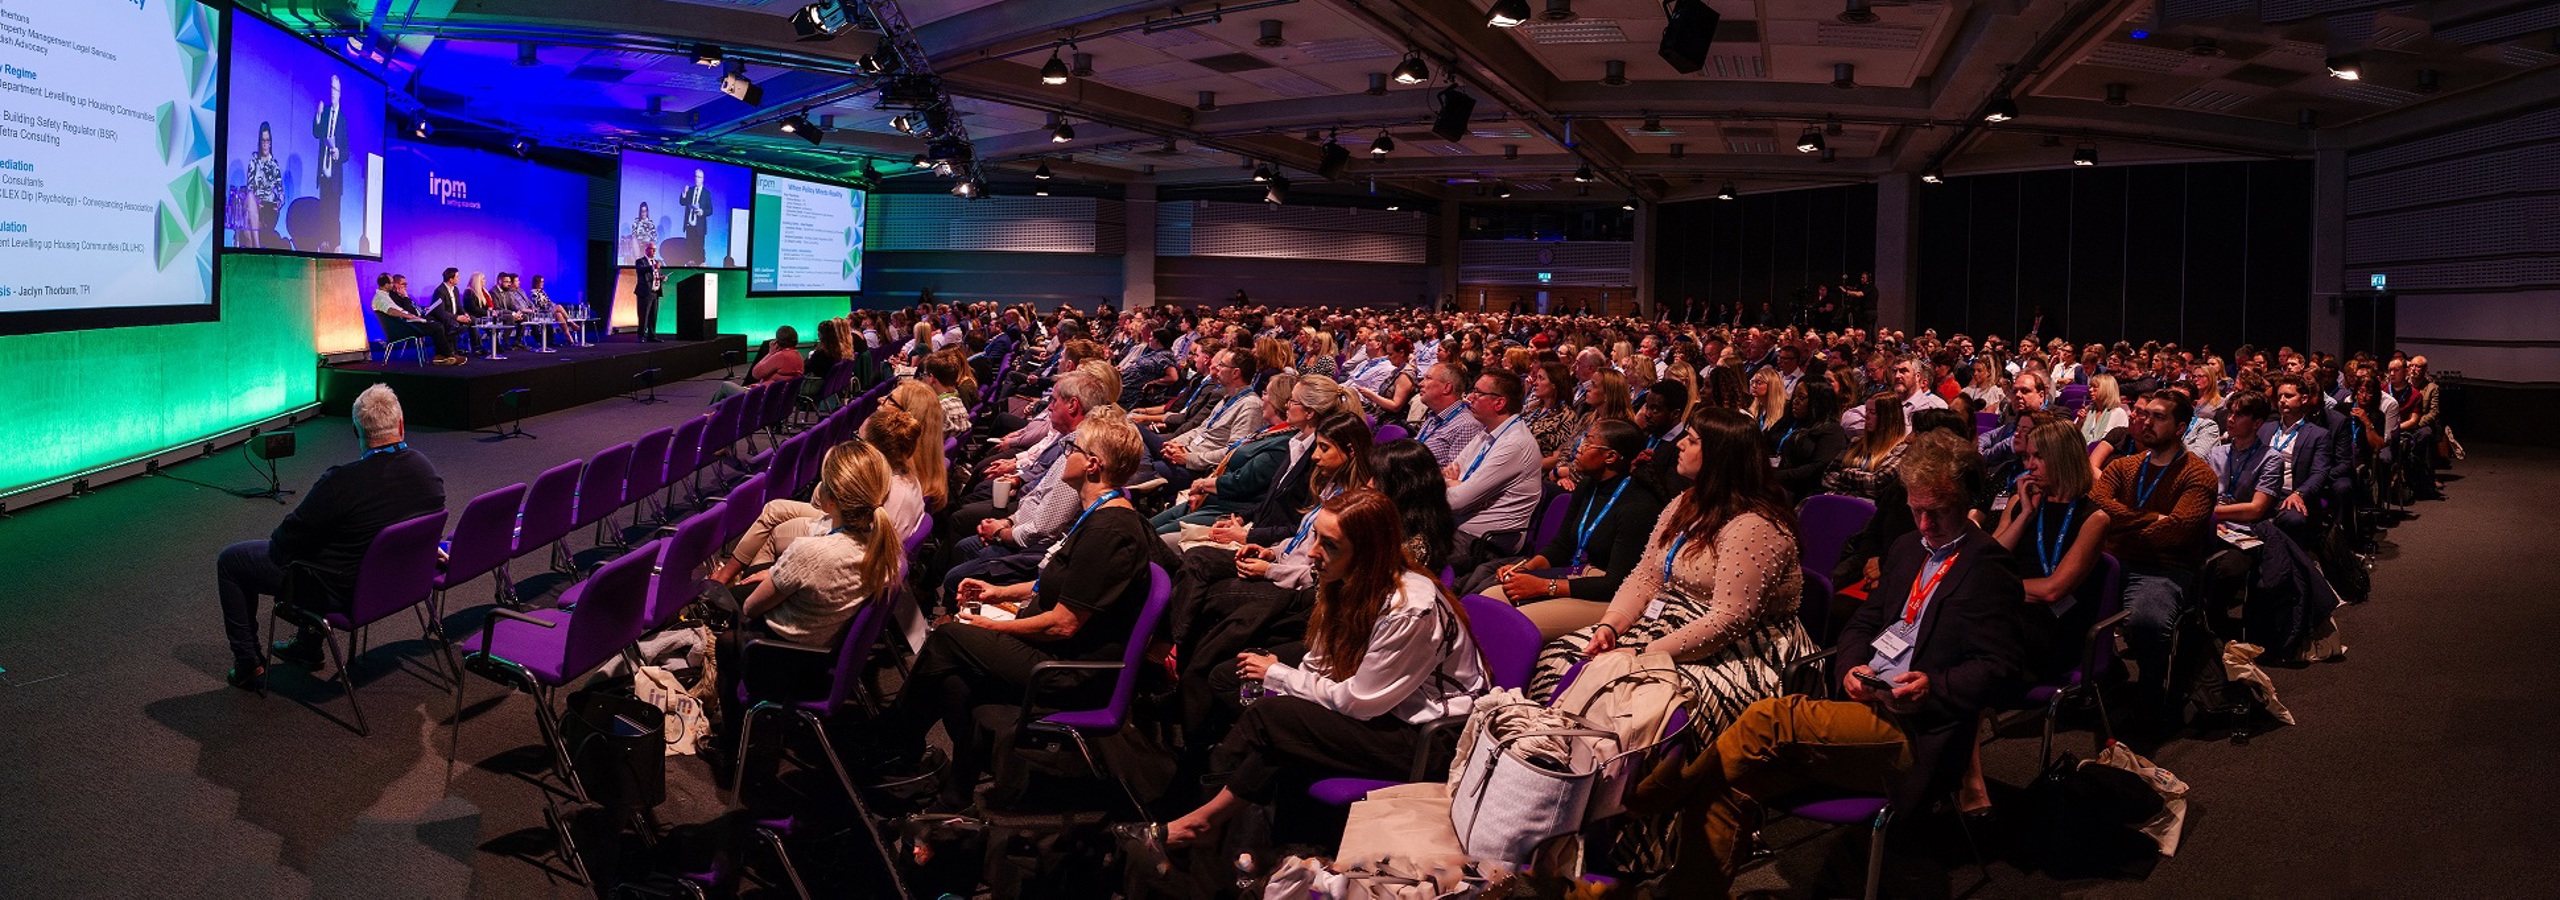 A wide angle photo of people on stage and people sitting listening at a property managers industry event